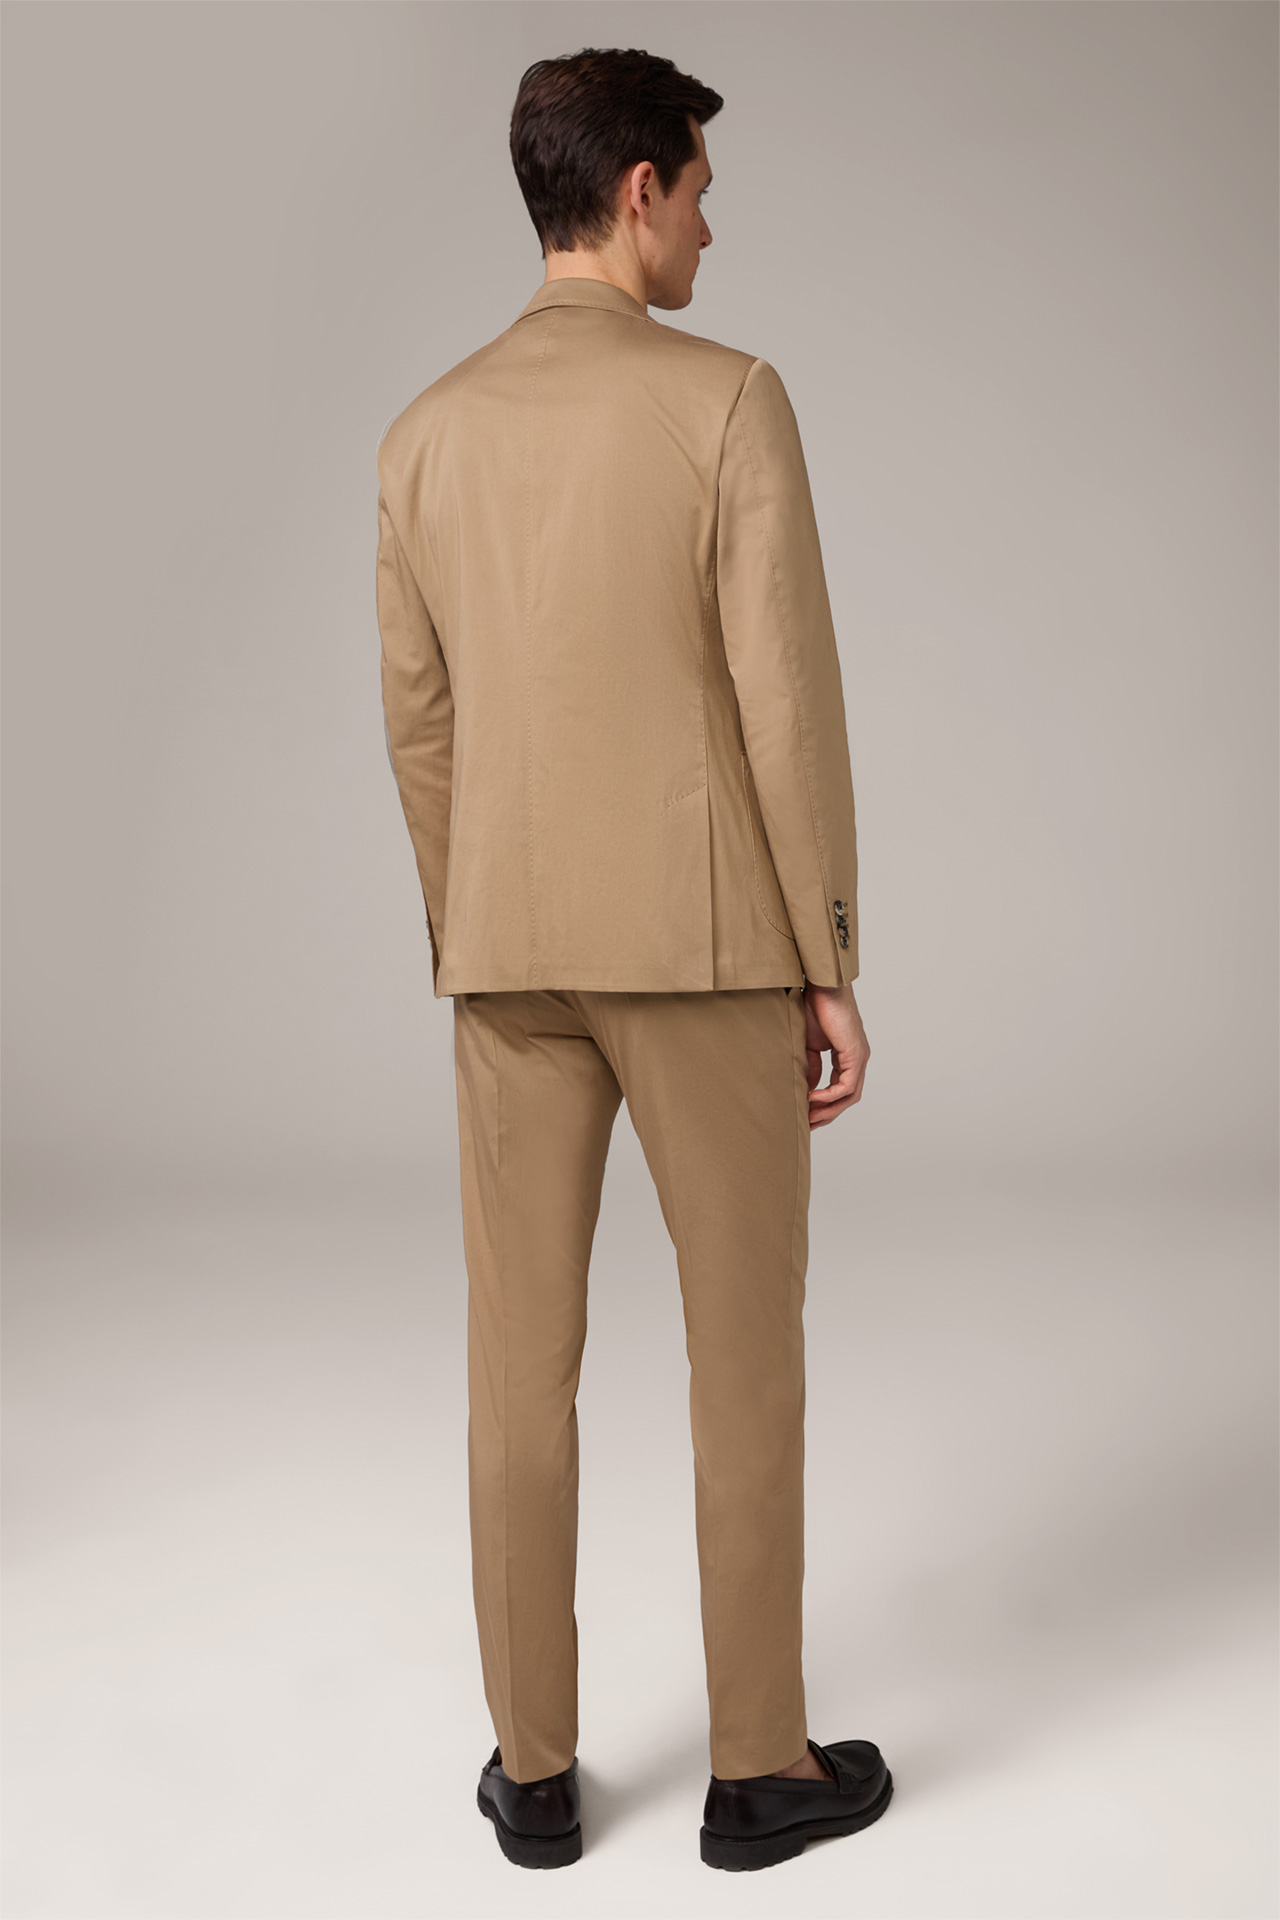 Seo-Bene Cotton Blend Suit in Camel Brown